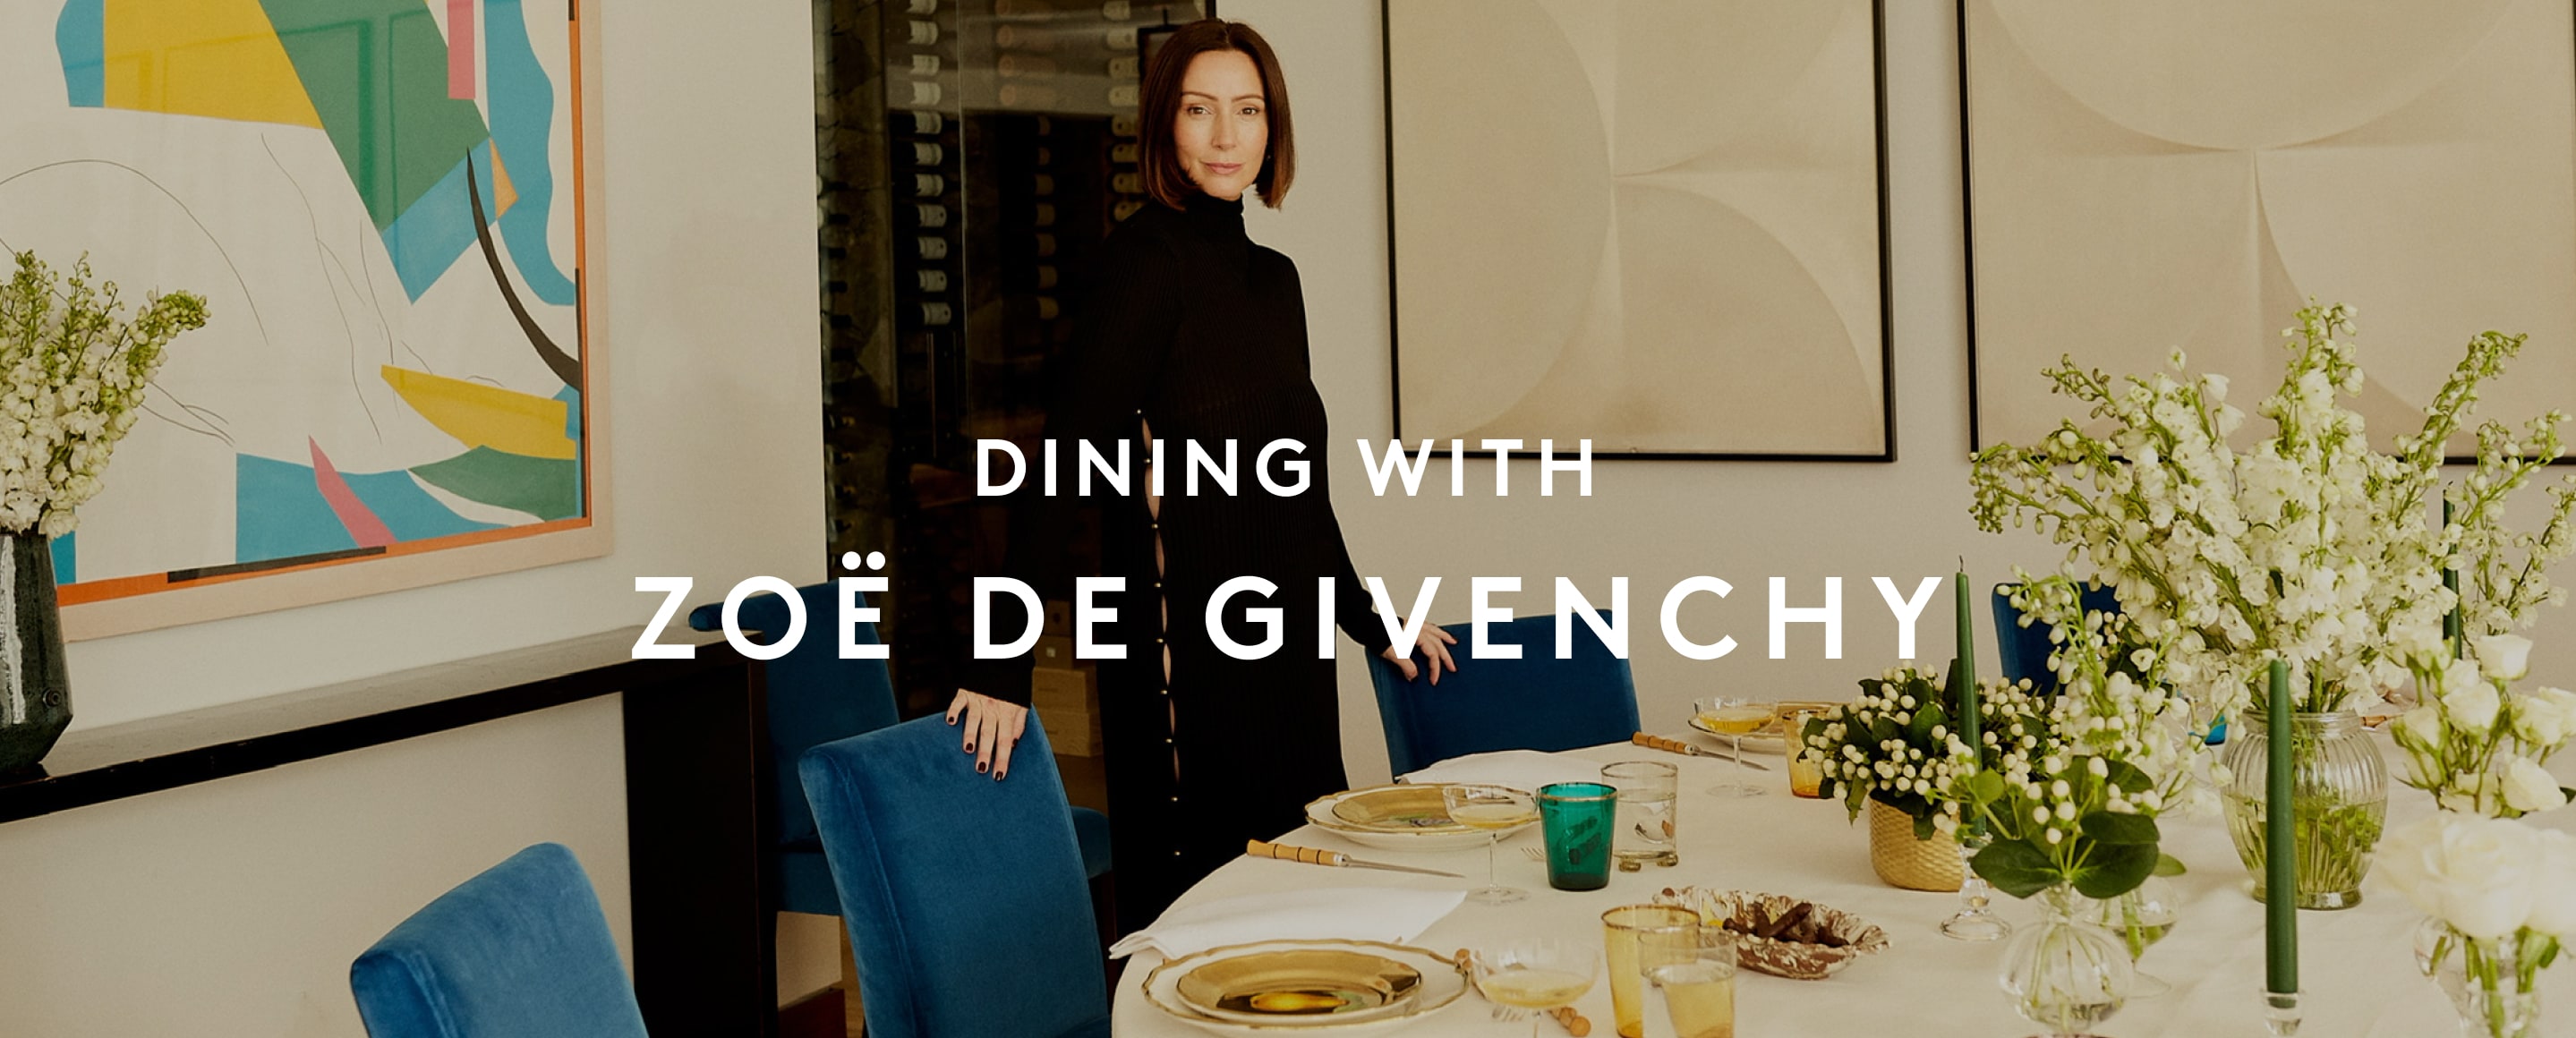 Dining with Zoë de Givenchy